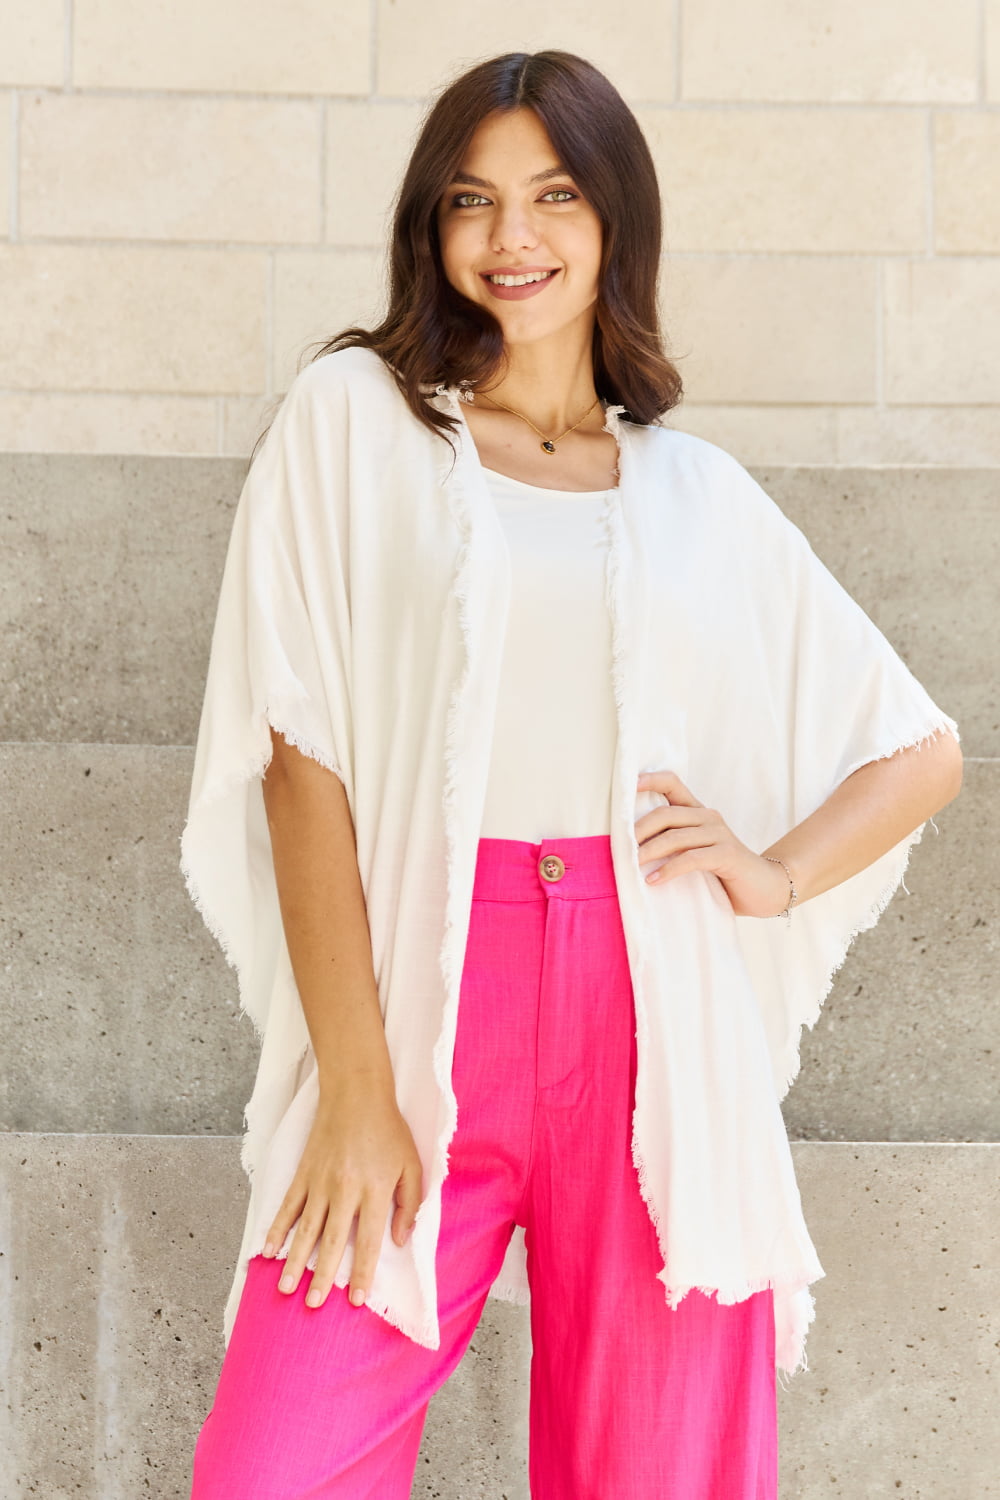 HEYSON Summer is Calling Full Size Wash Gauze Open Front Kimono in Off White